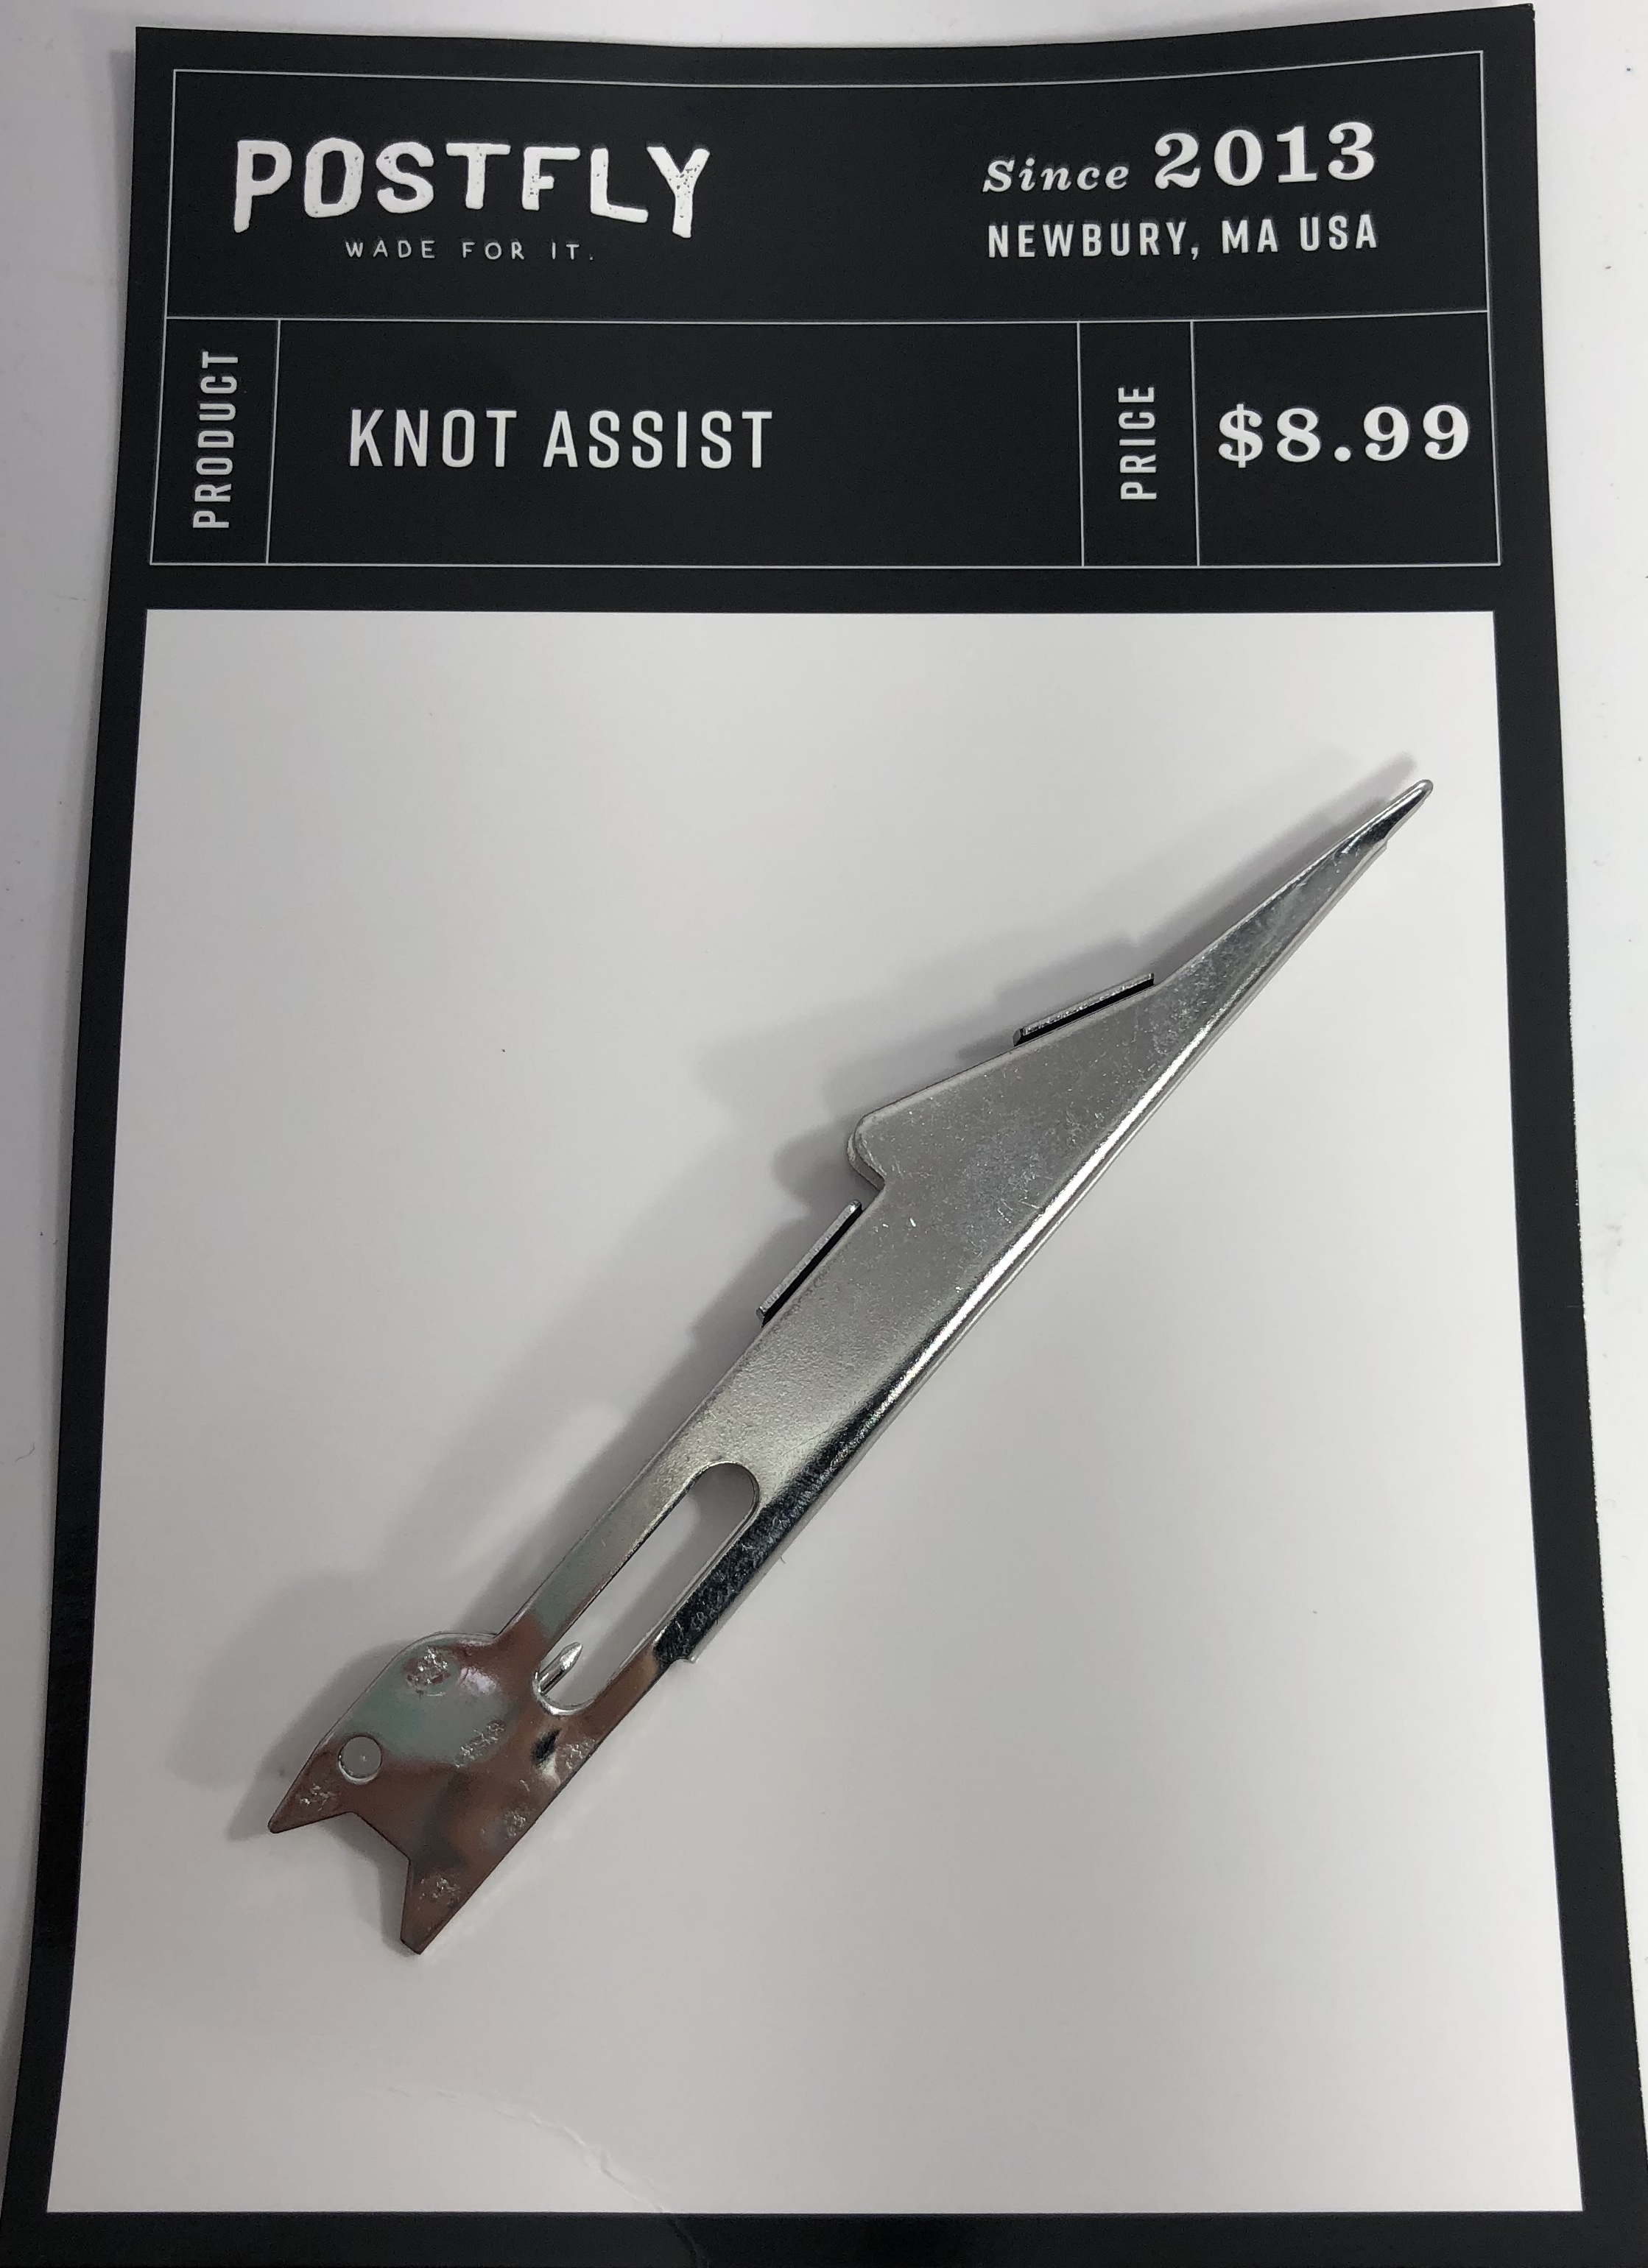 How to Use the Knot Assist Tool